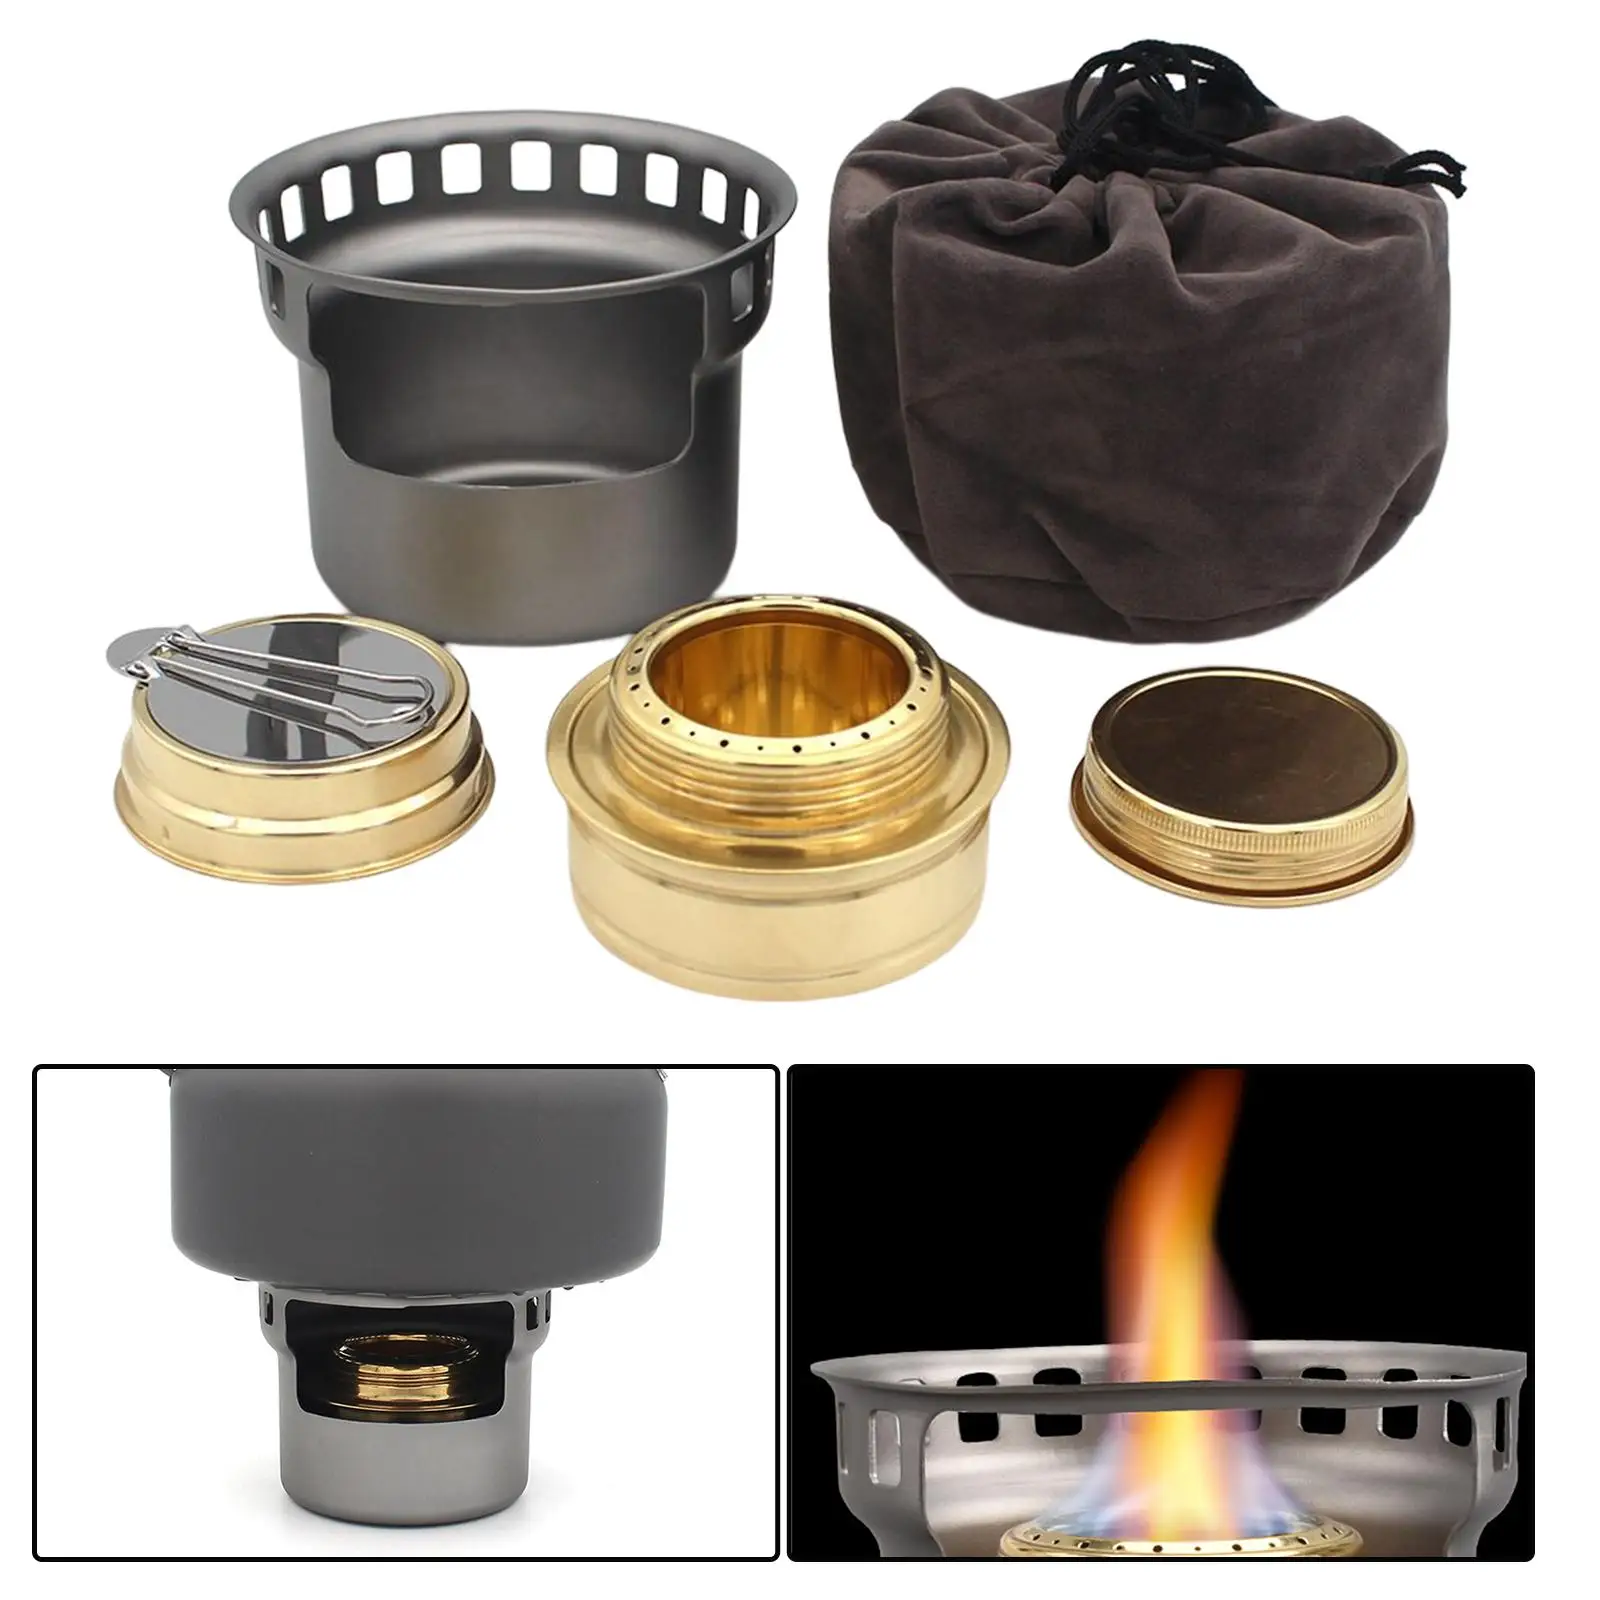 Spirit Stove Burner with Bag Lightweight   Stove for Travel Camping